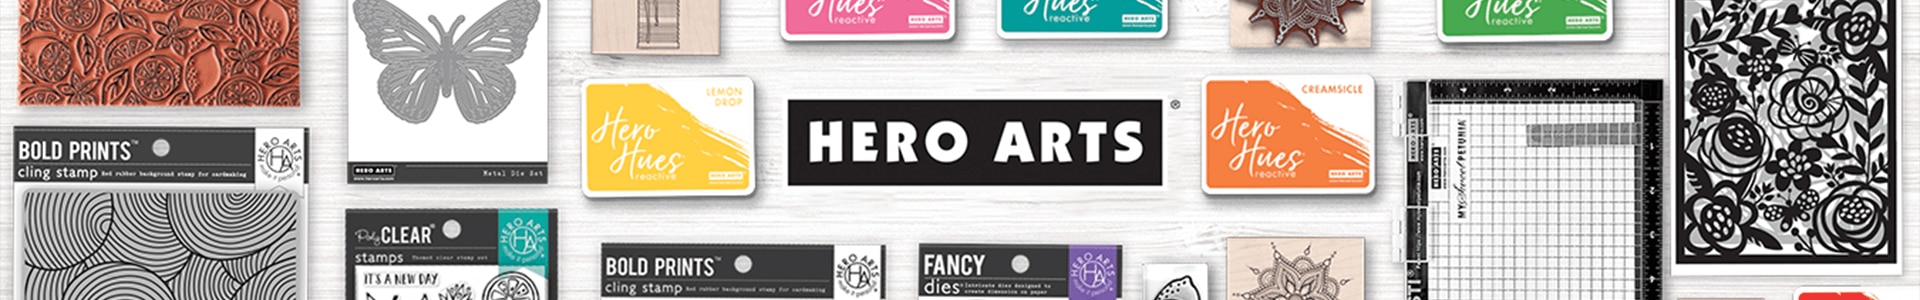 JOANN has the largest assortment of Hero Arts stamps, stamp pads, dies & accessories, for your next craft or card-making project.